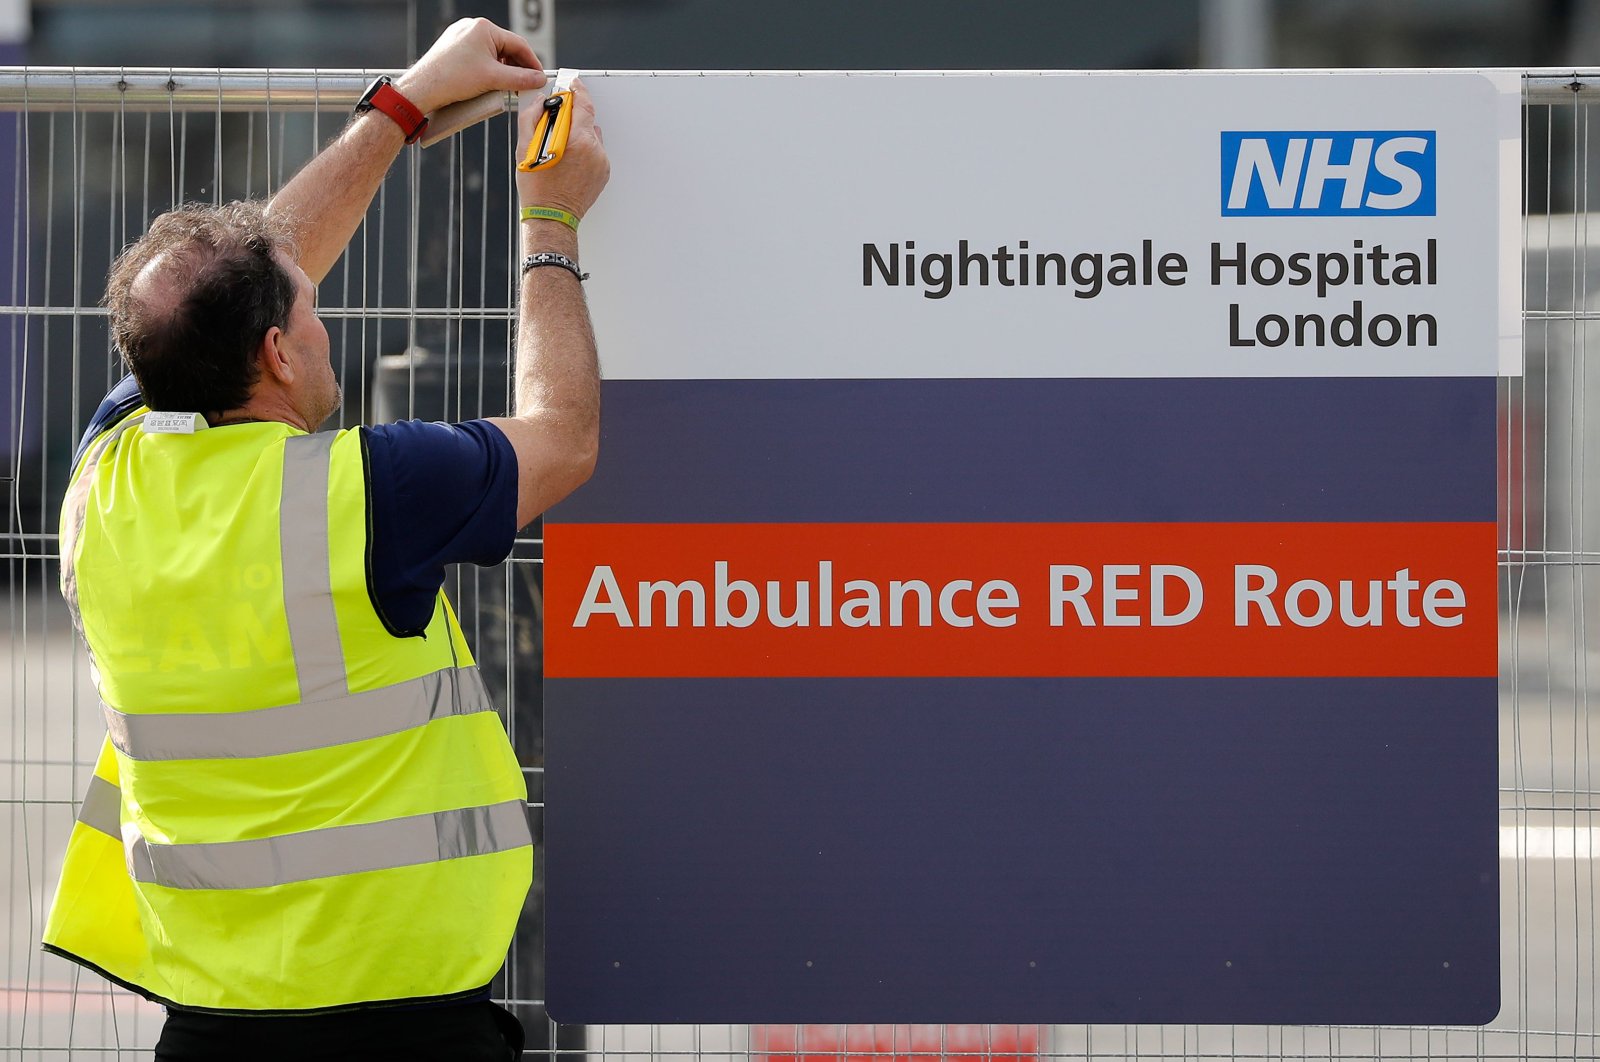 A worker fixes a new sign to a fence at the ExCeL London exhibition center, which has been transformed into the "NHS Nightingale" field hospital, to help with the novel coronavirus COVID-19 pandemic, in London on Friday, April 3, 2020. (AFP Photo)